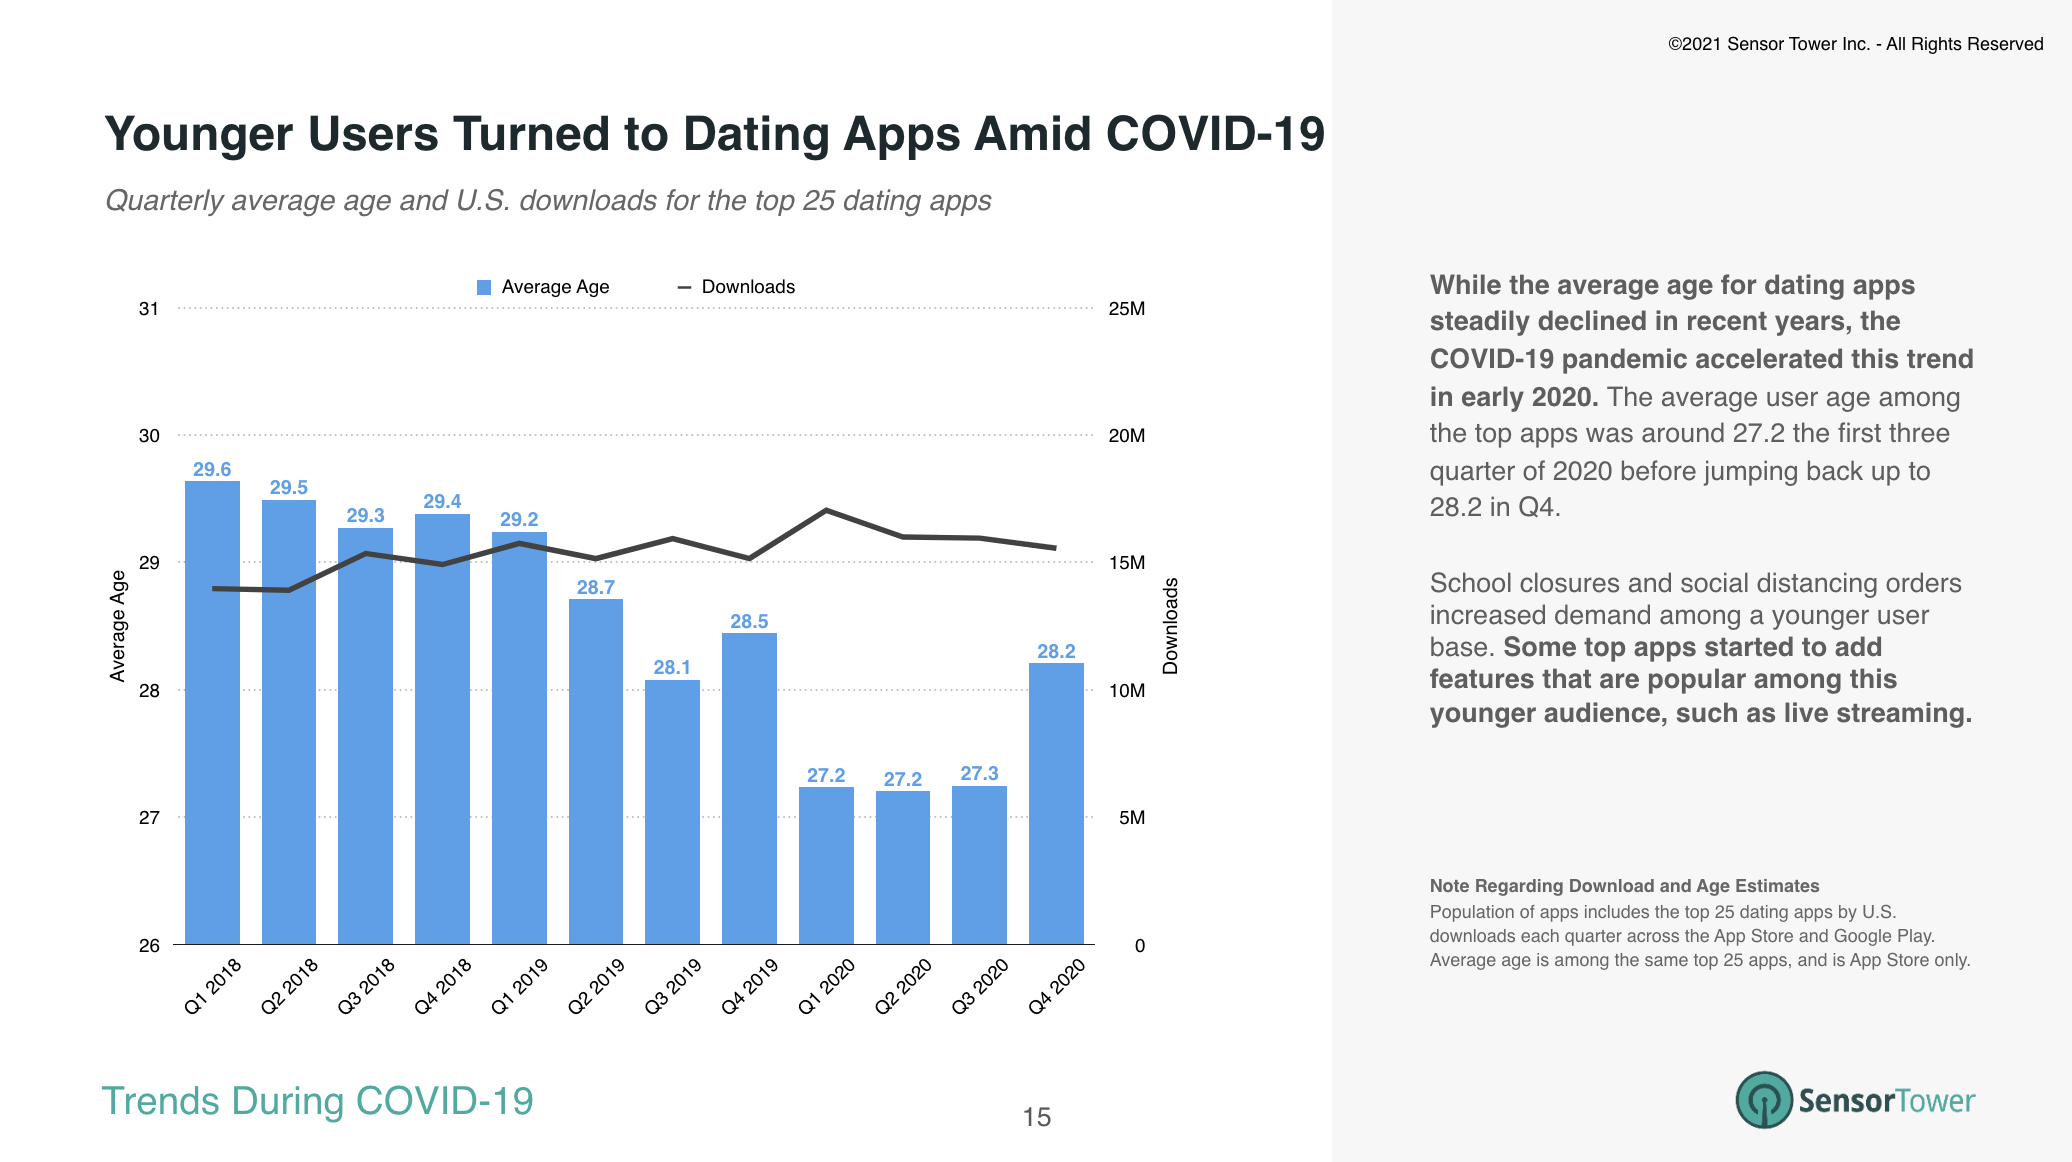 Top dating apps in the U.S. saw the average age of their users drop to its lowest during COVID-19